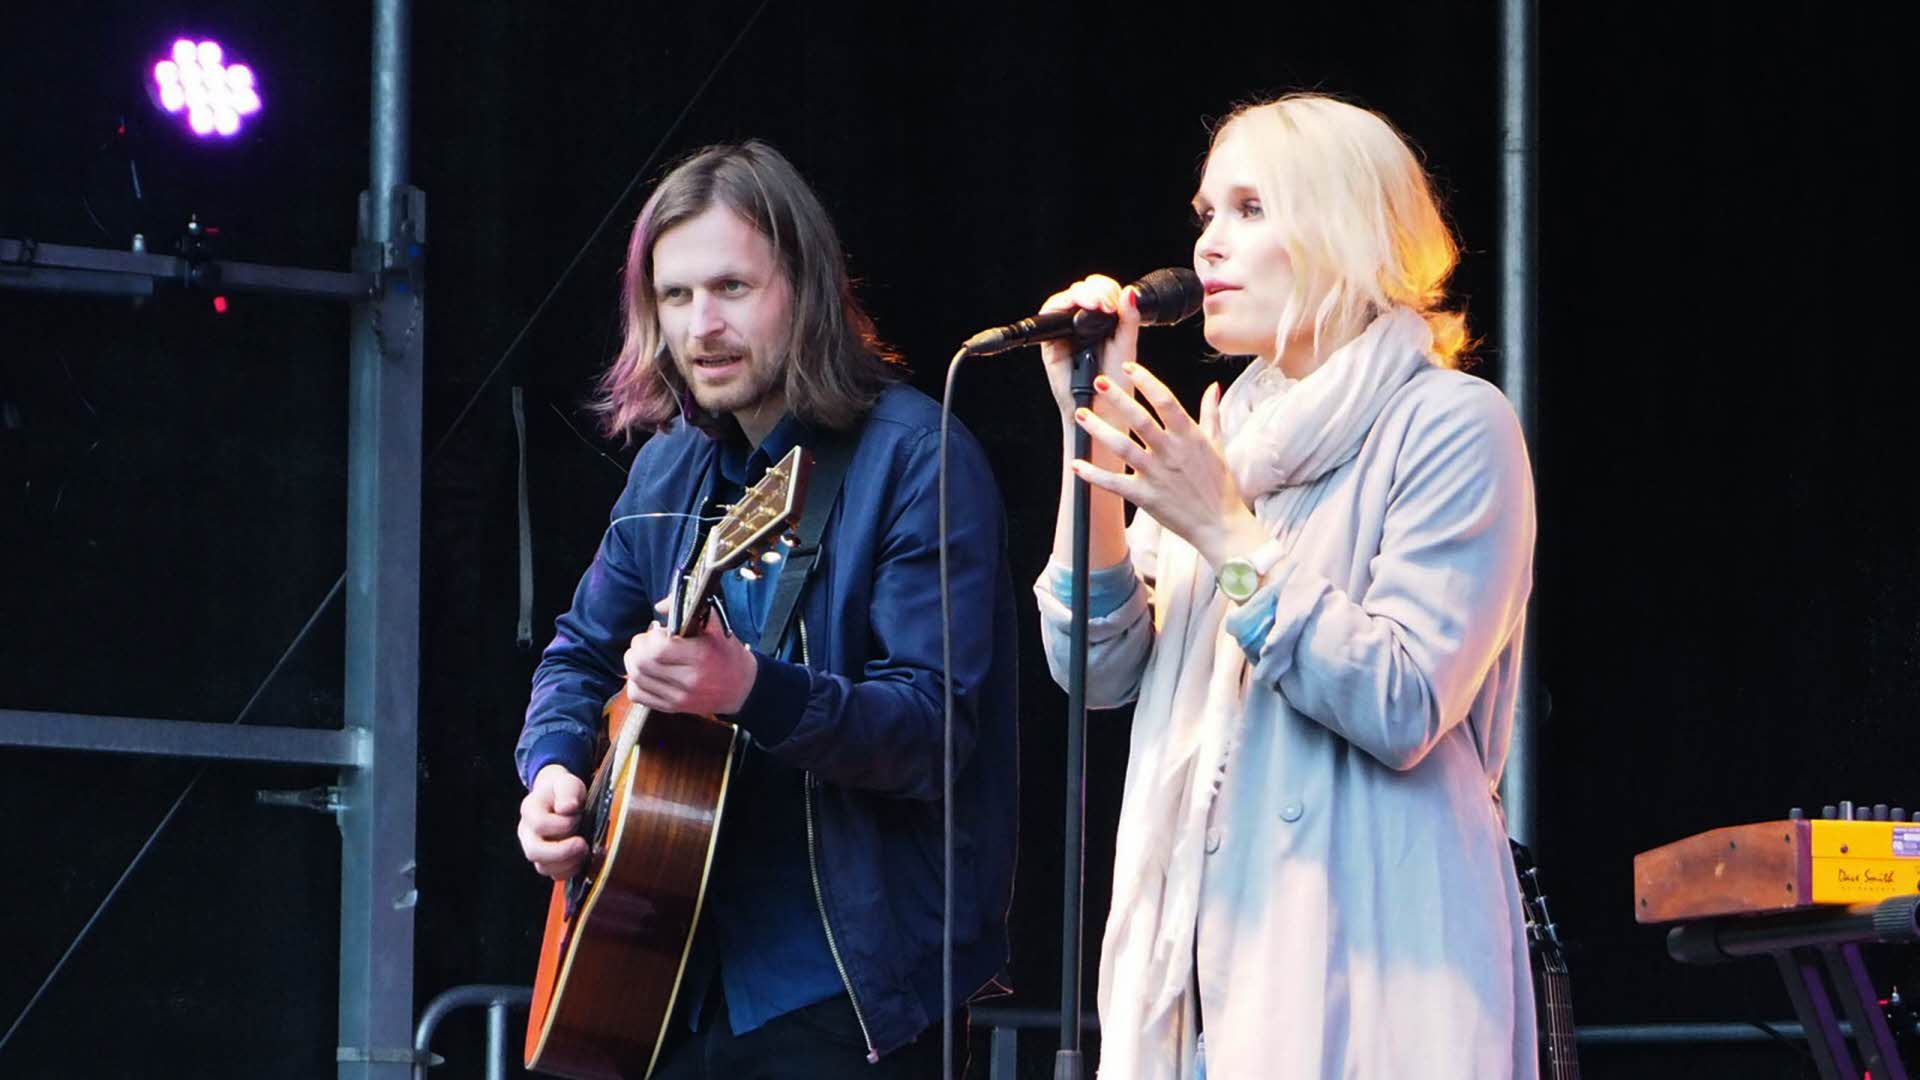 A blond woman singing into a microphone and a man with long hair playing guitar on a stage.